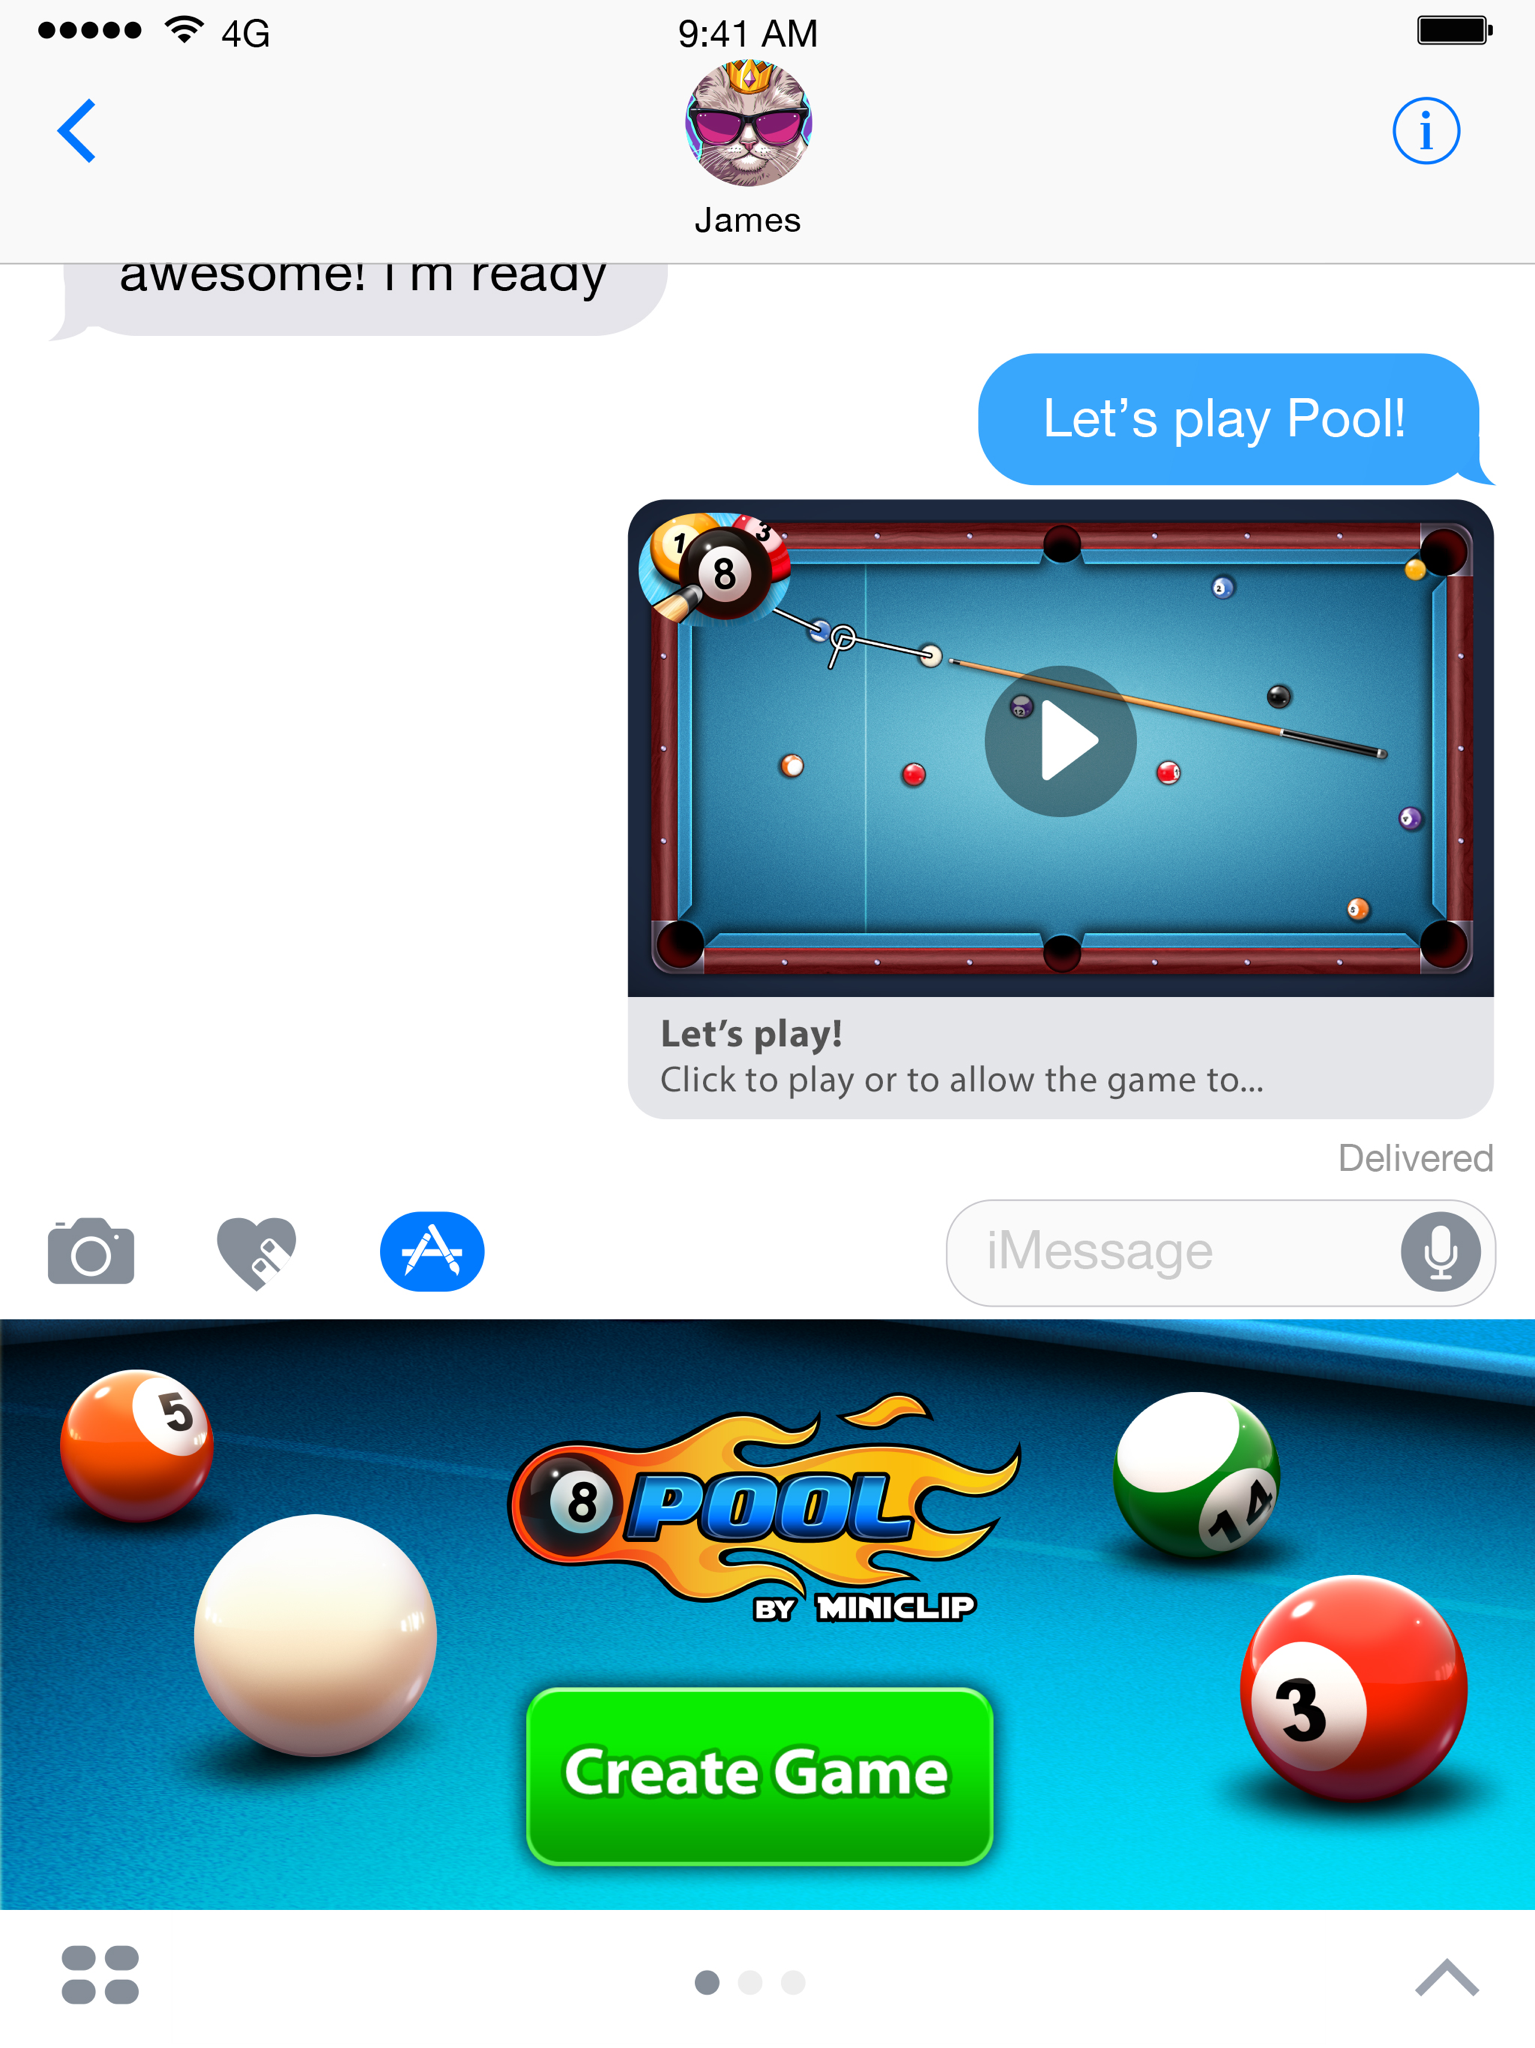 8 Ball Pool Overview Apple App Store United Arab Emirates